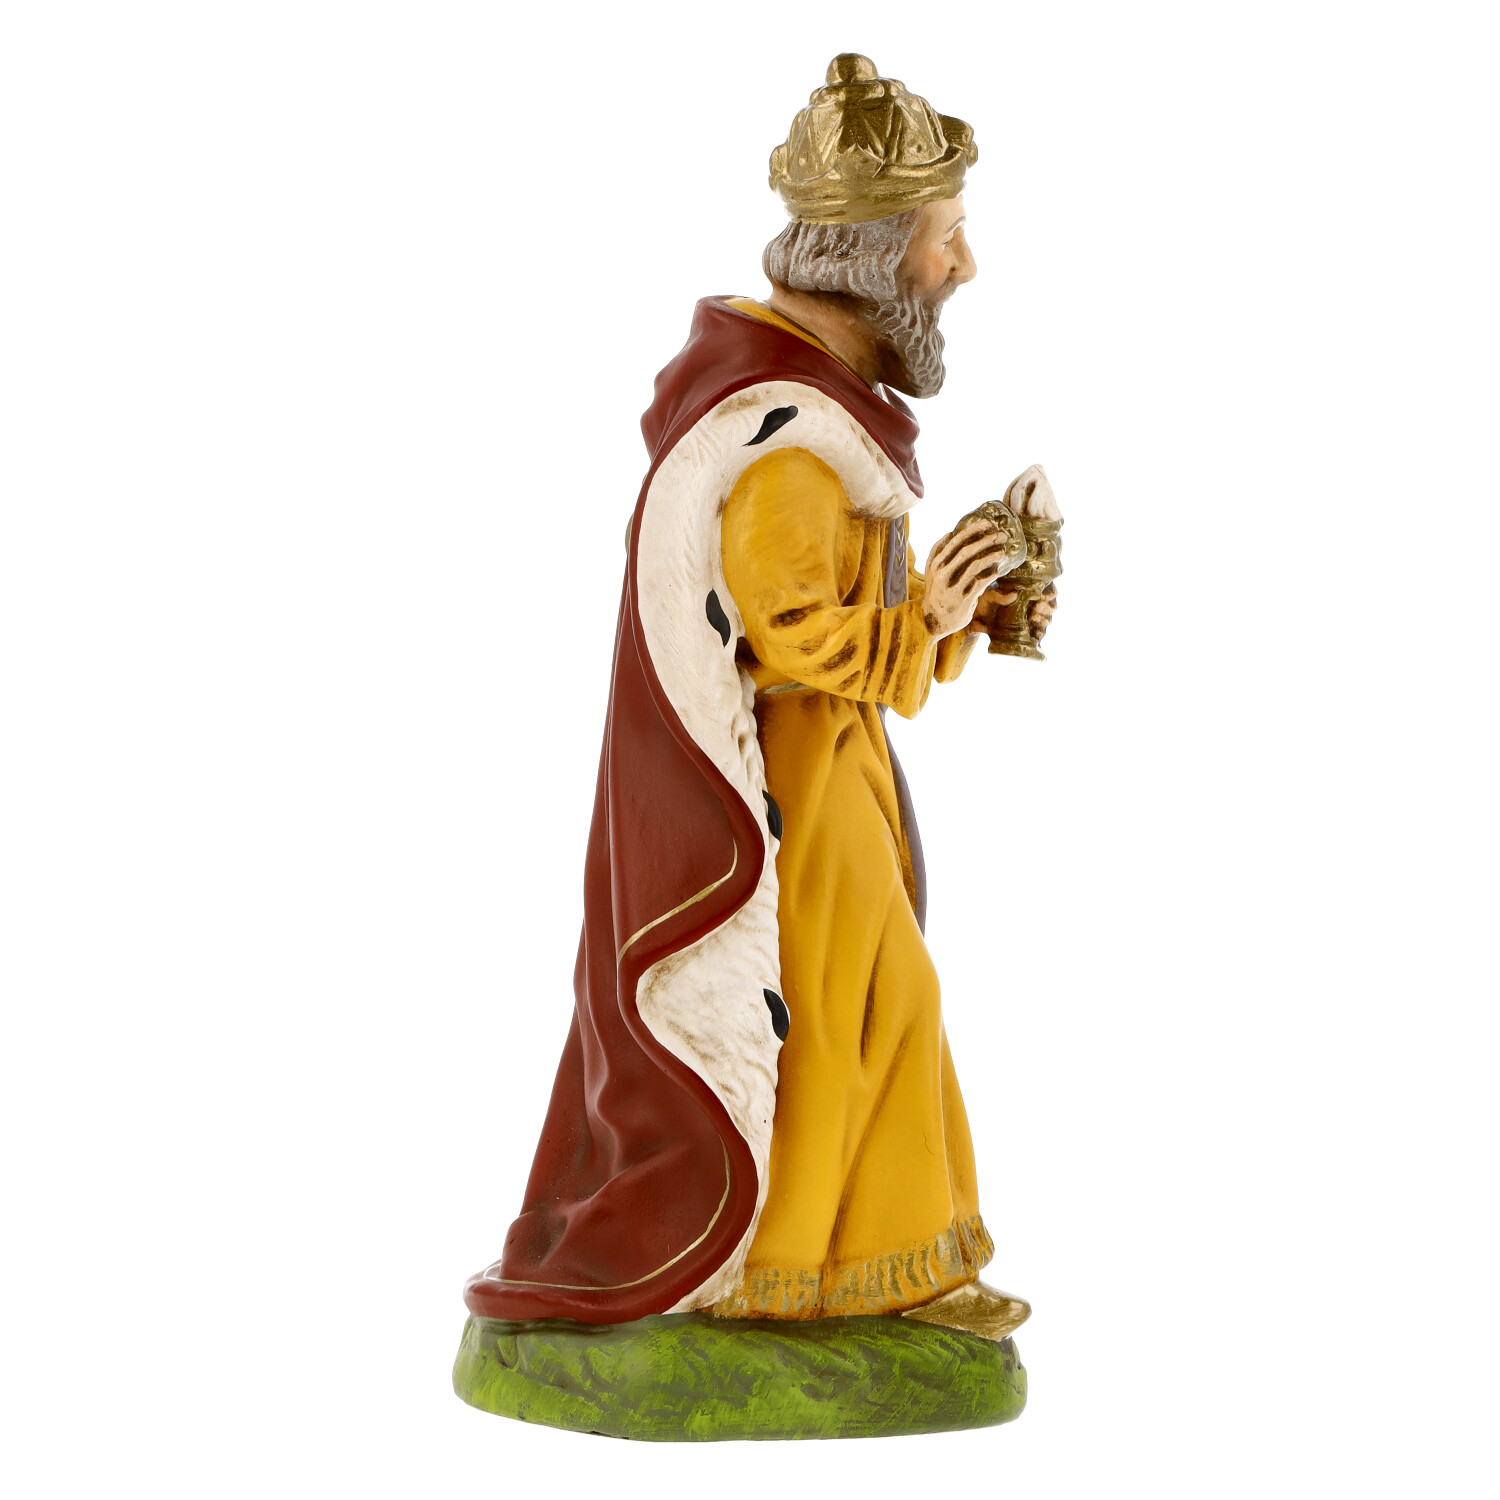 Baltazar, to 6.75 in. figures - Marolin Papermaché - made in Germany